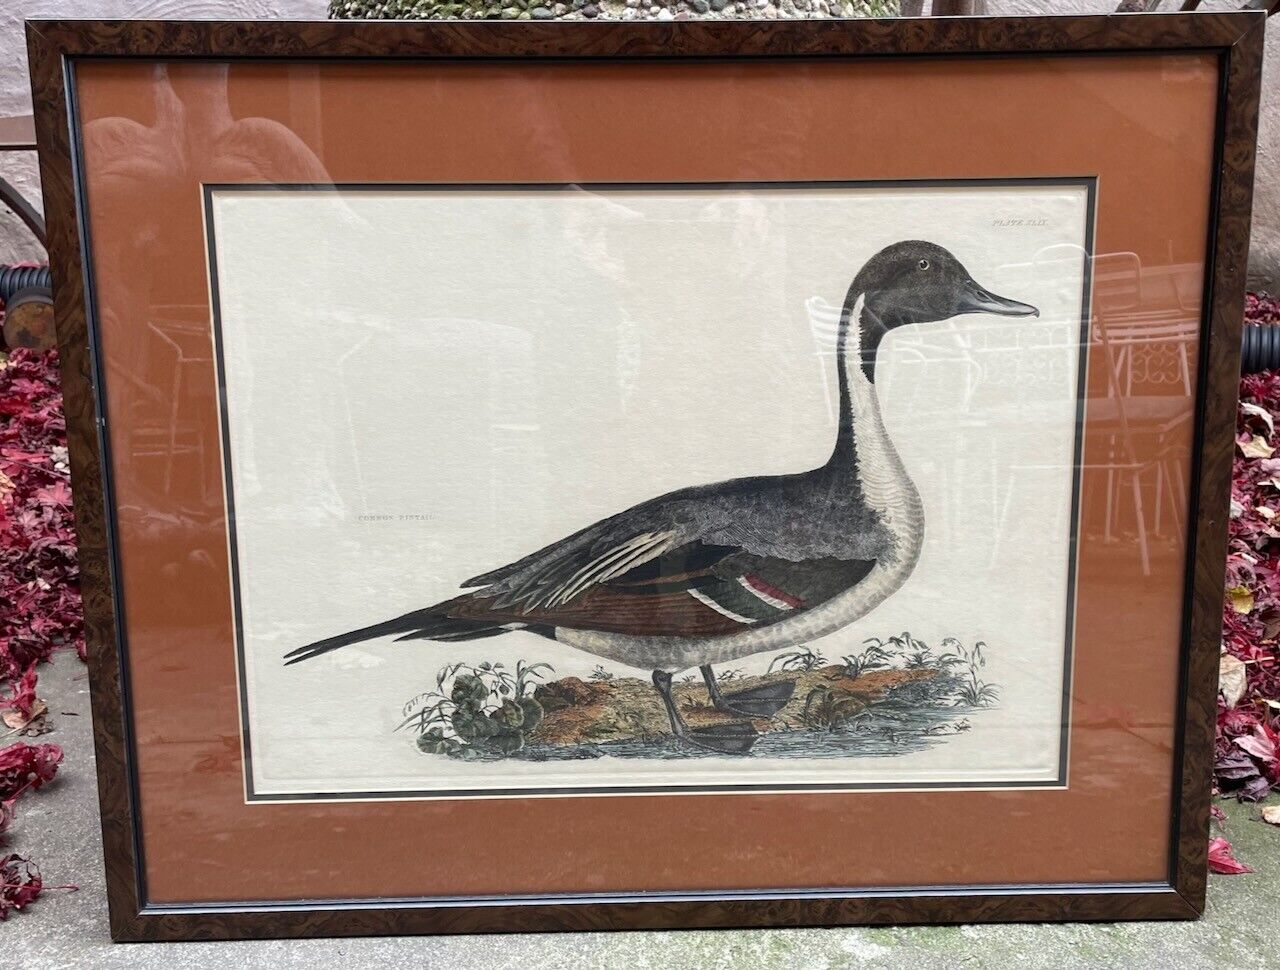 Prideaux John Selby "Common Pintail" Framed Hand-Colored Copper Engraving Без бренда - фотография #2